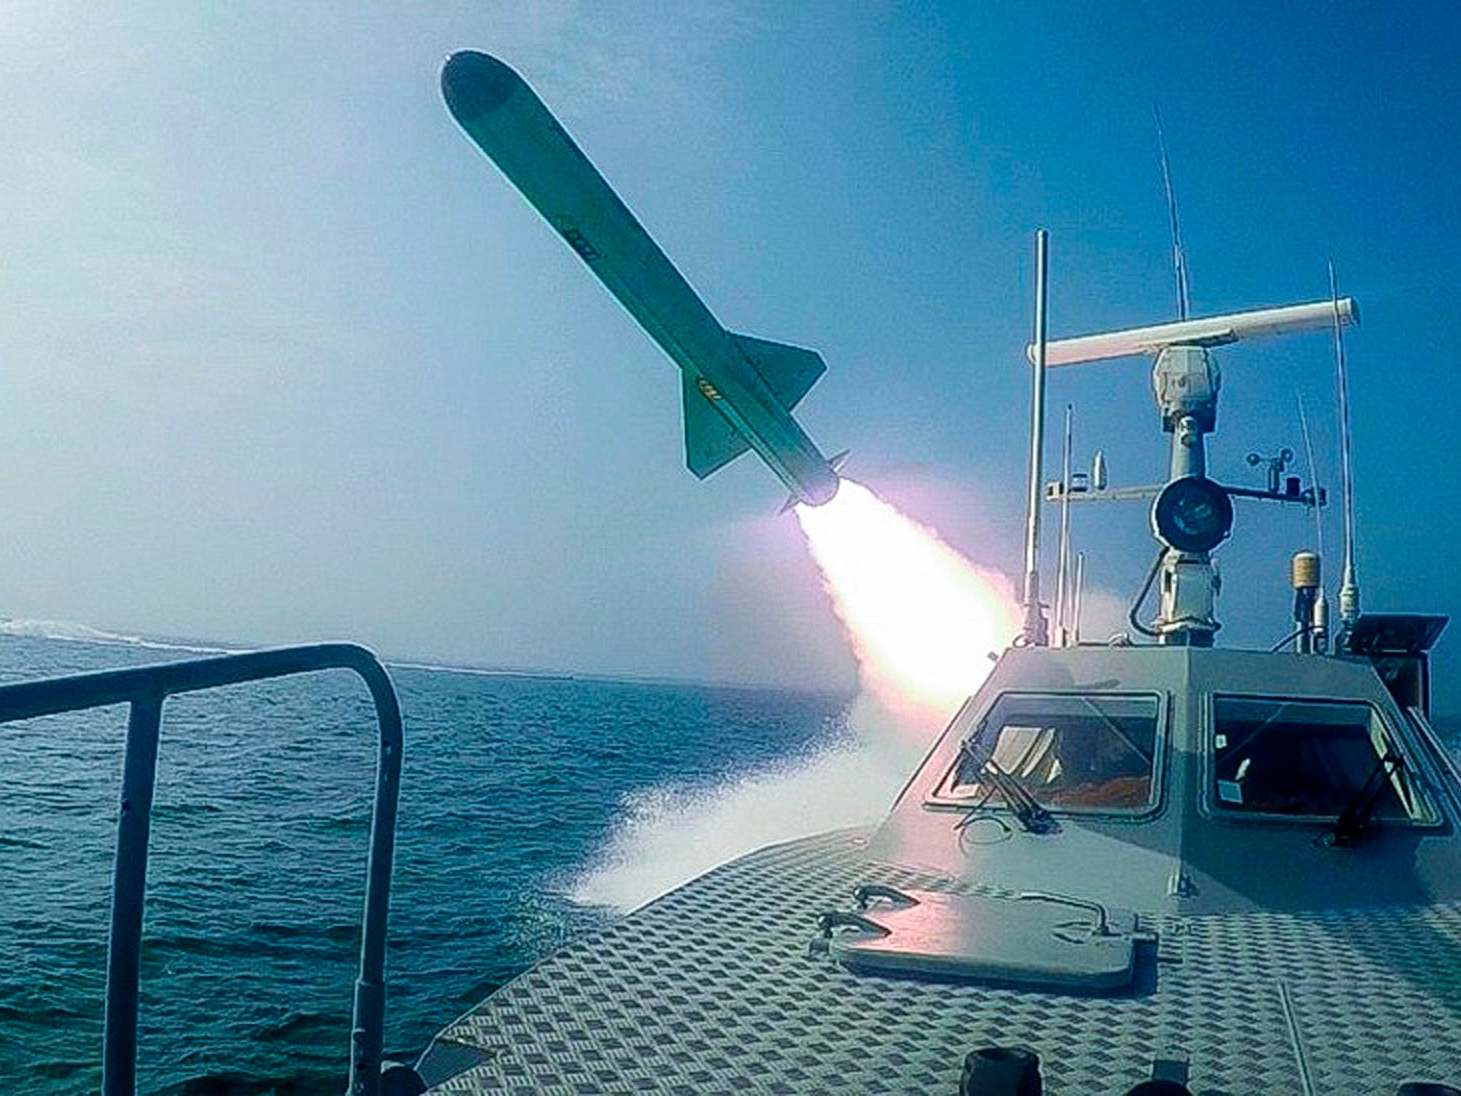 A Revolutionary Guard boat fires a missile during a military exercise on Tuesday